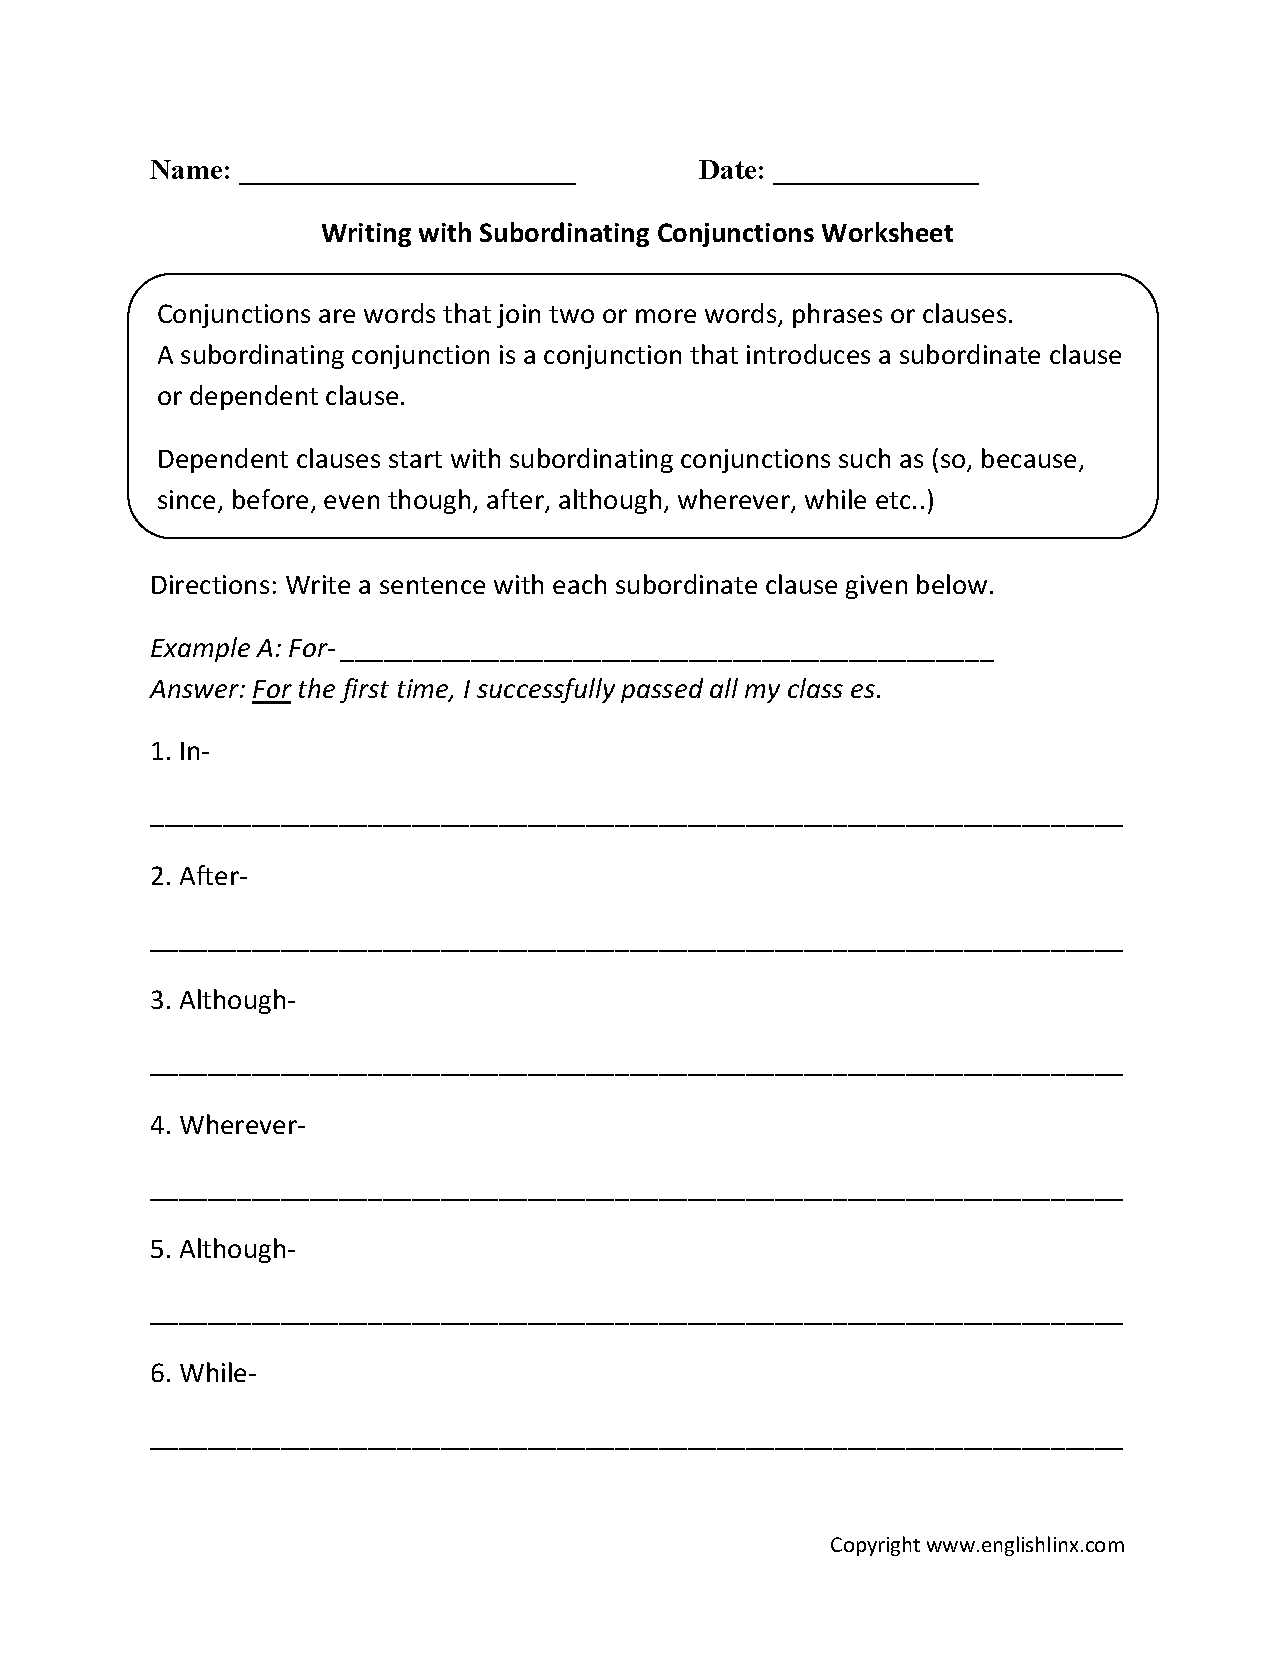 Writing With Subordinating Conjunctions Worksheets